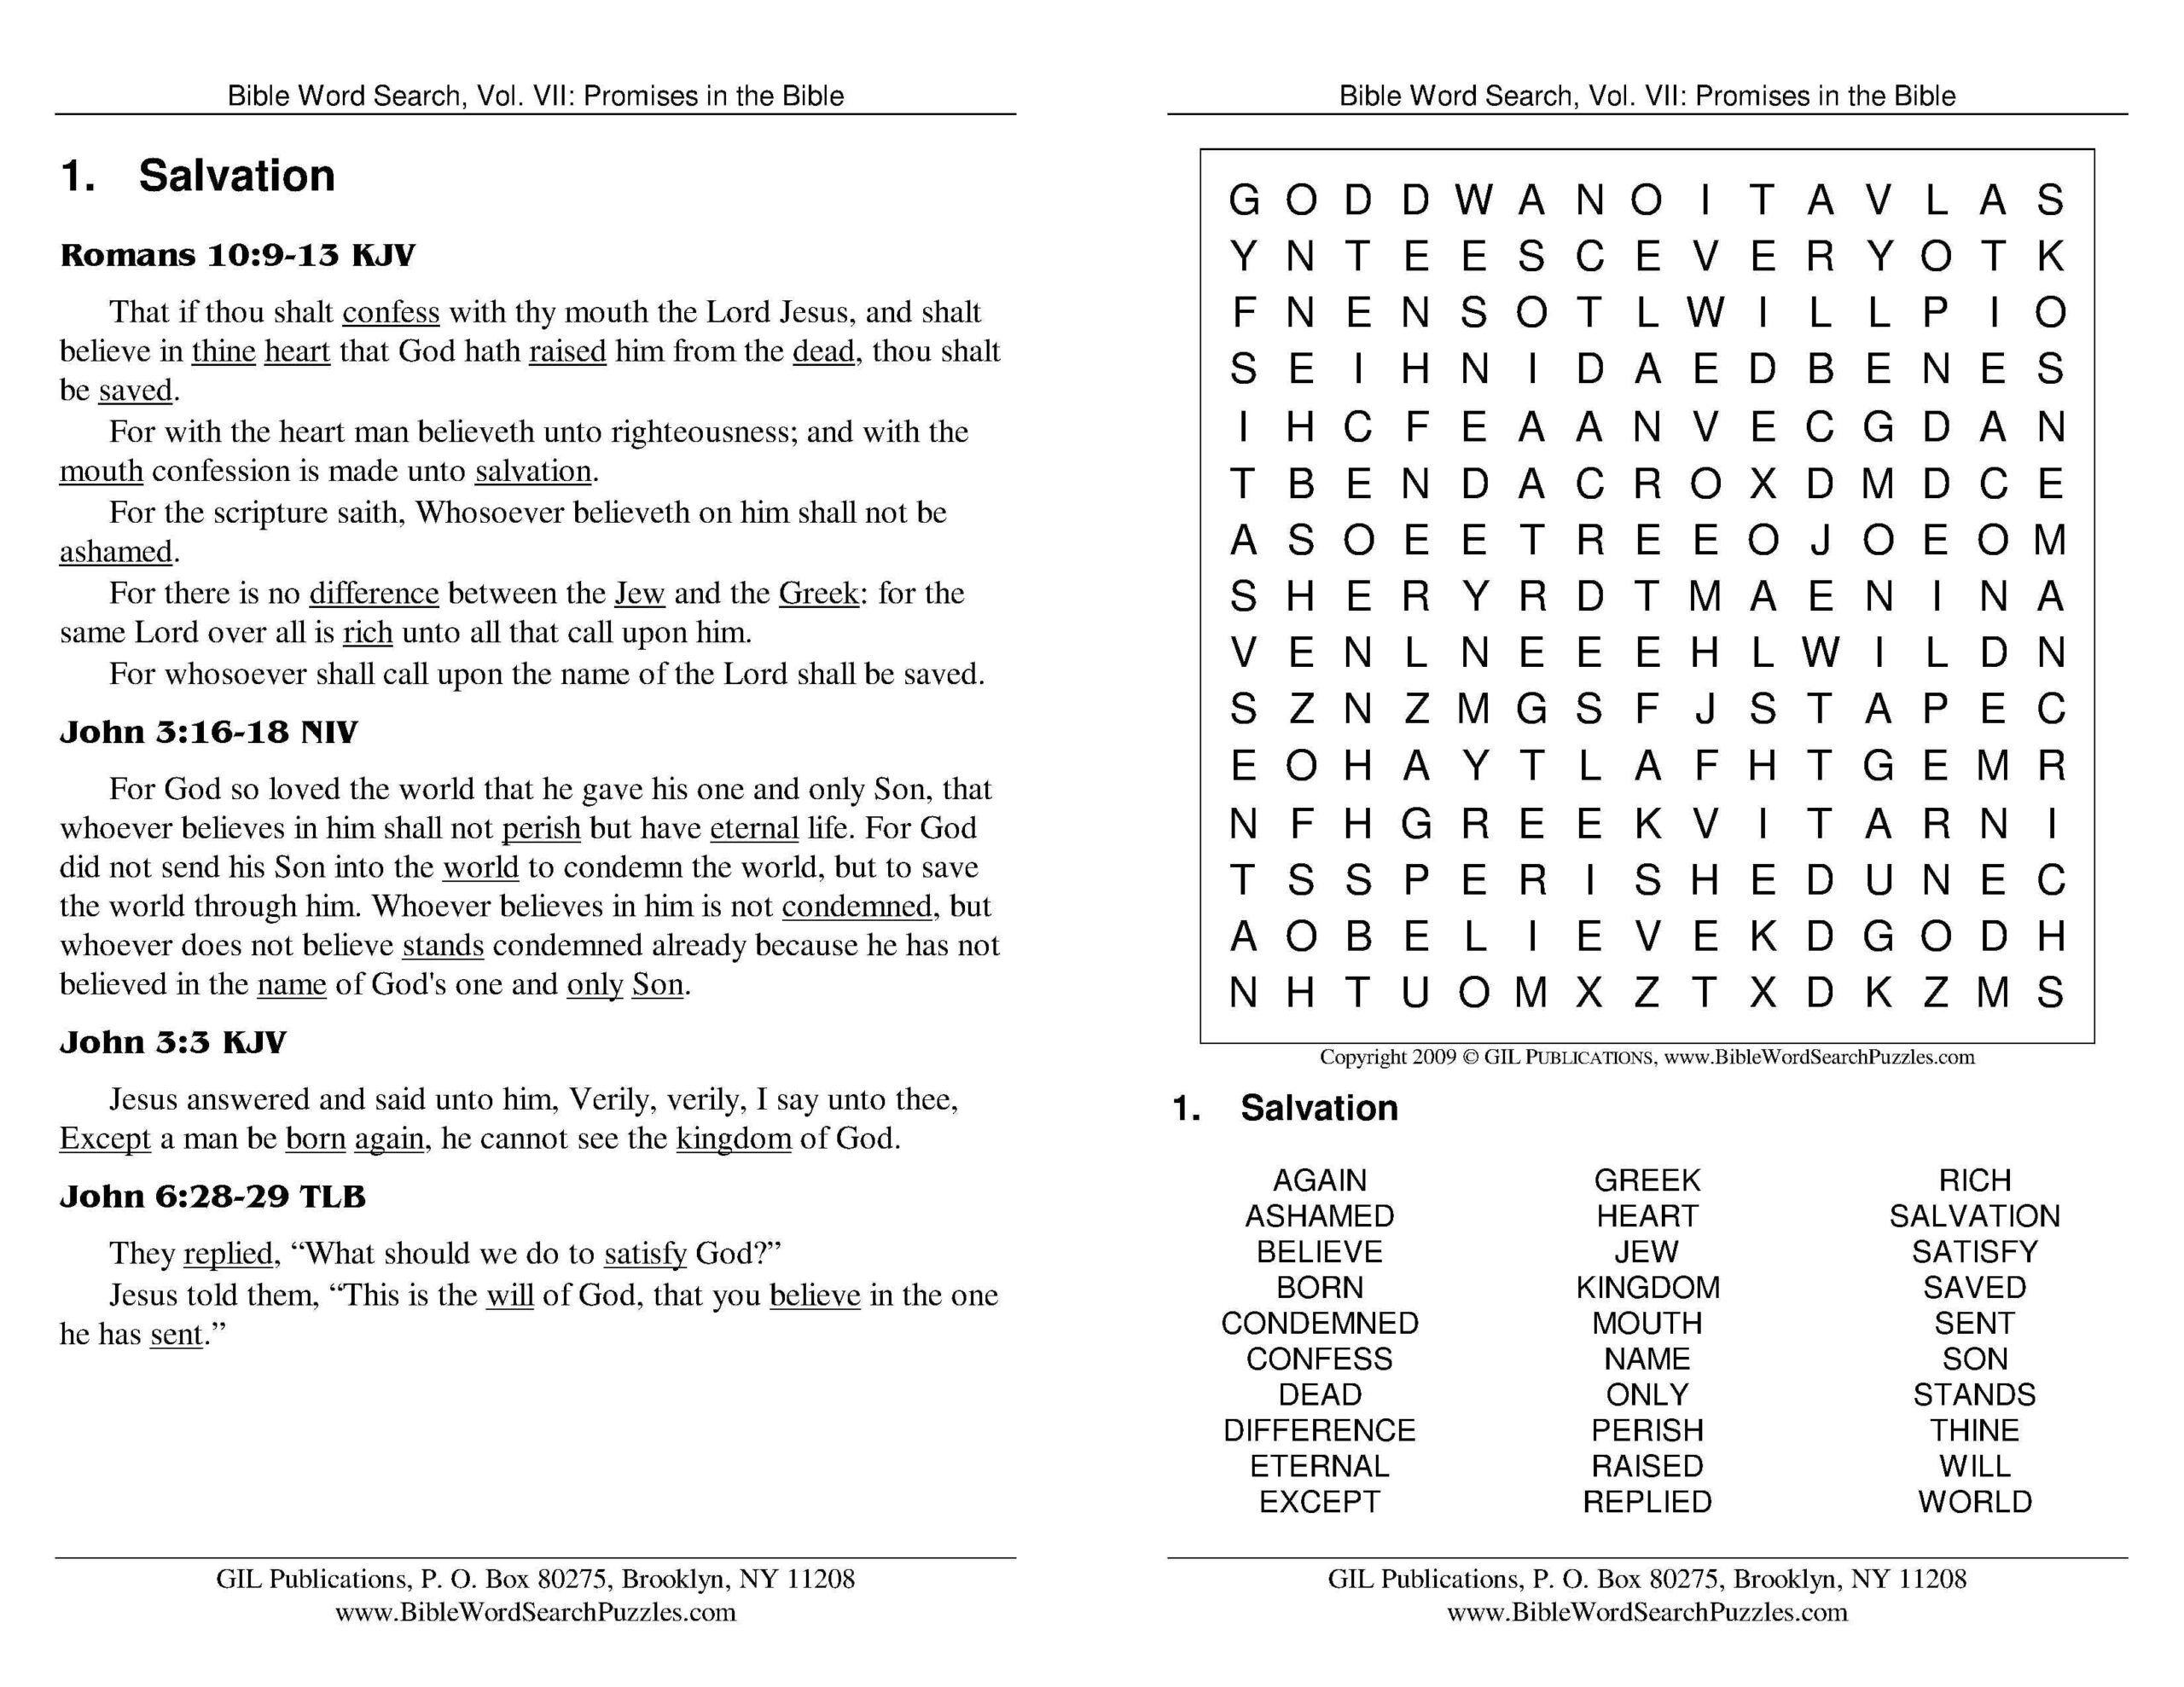 Online Bible Word Search